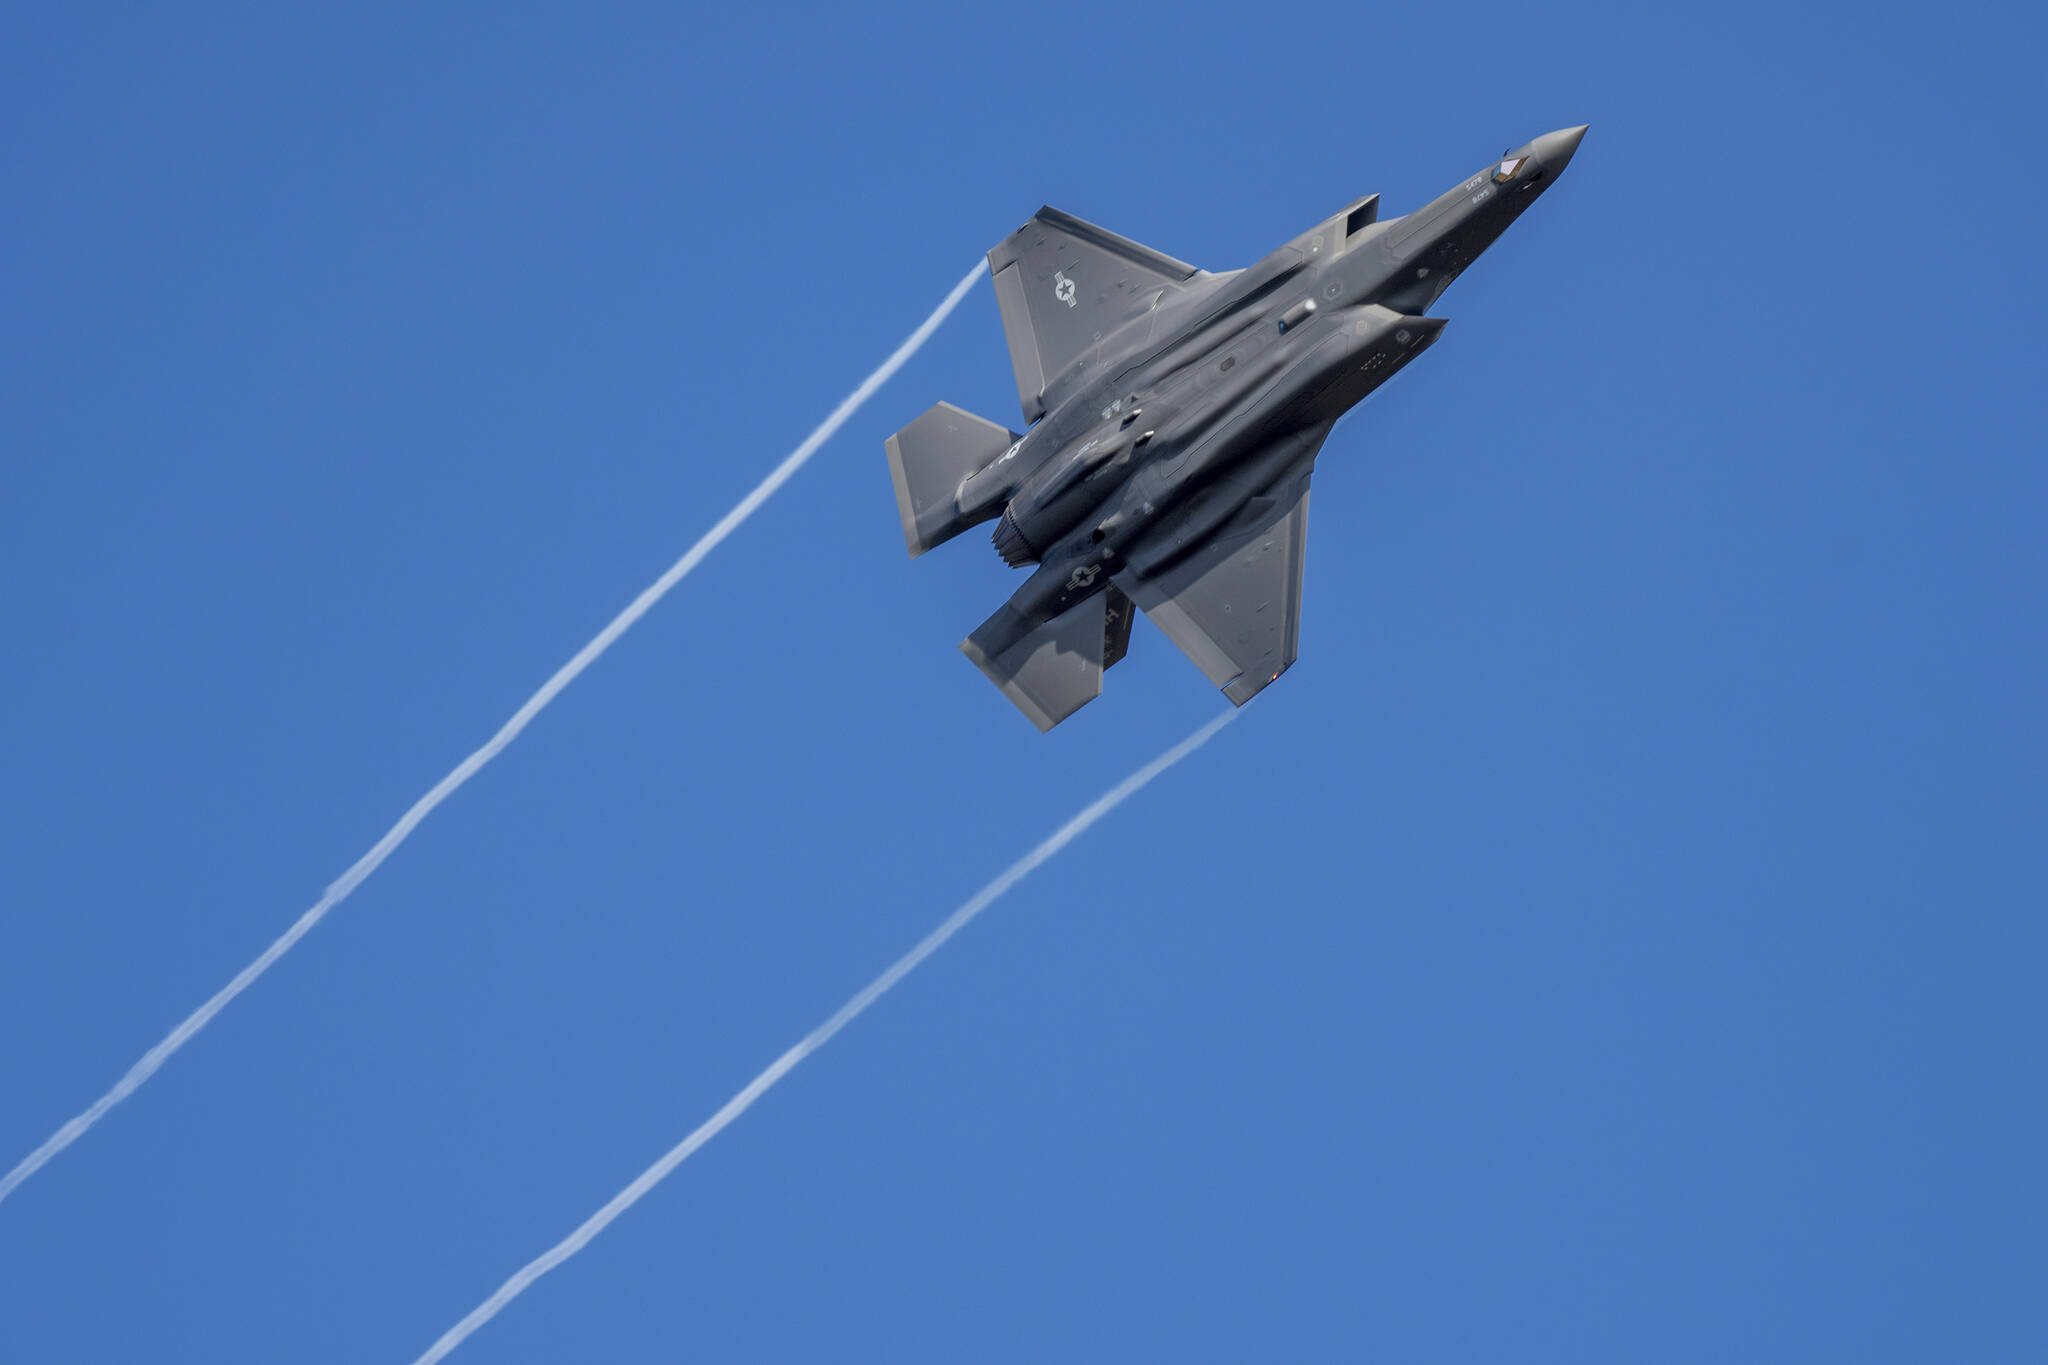 A U.S. F-35 fighter jet flies over the Eifel Mountains near Spangdahlem, Germany, Wednesday, Feb. 23, 2022. The U.S. Armed Forces moved stealth fighter jets to Spangdahlem Air Base a few days ago. The aircraft, built by the U.S. company Lockheed-Martin, is considered the most modern stealth fighter aircraft in the world. (Harald Tittel/dpa via AP)